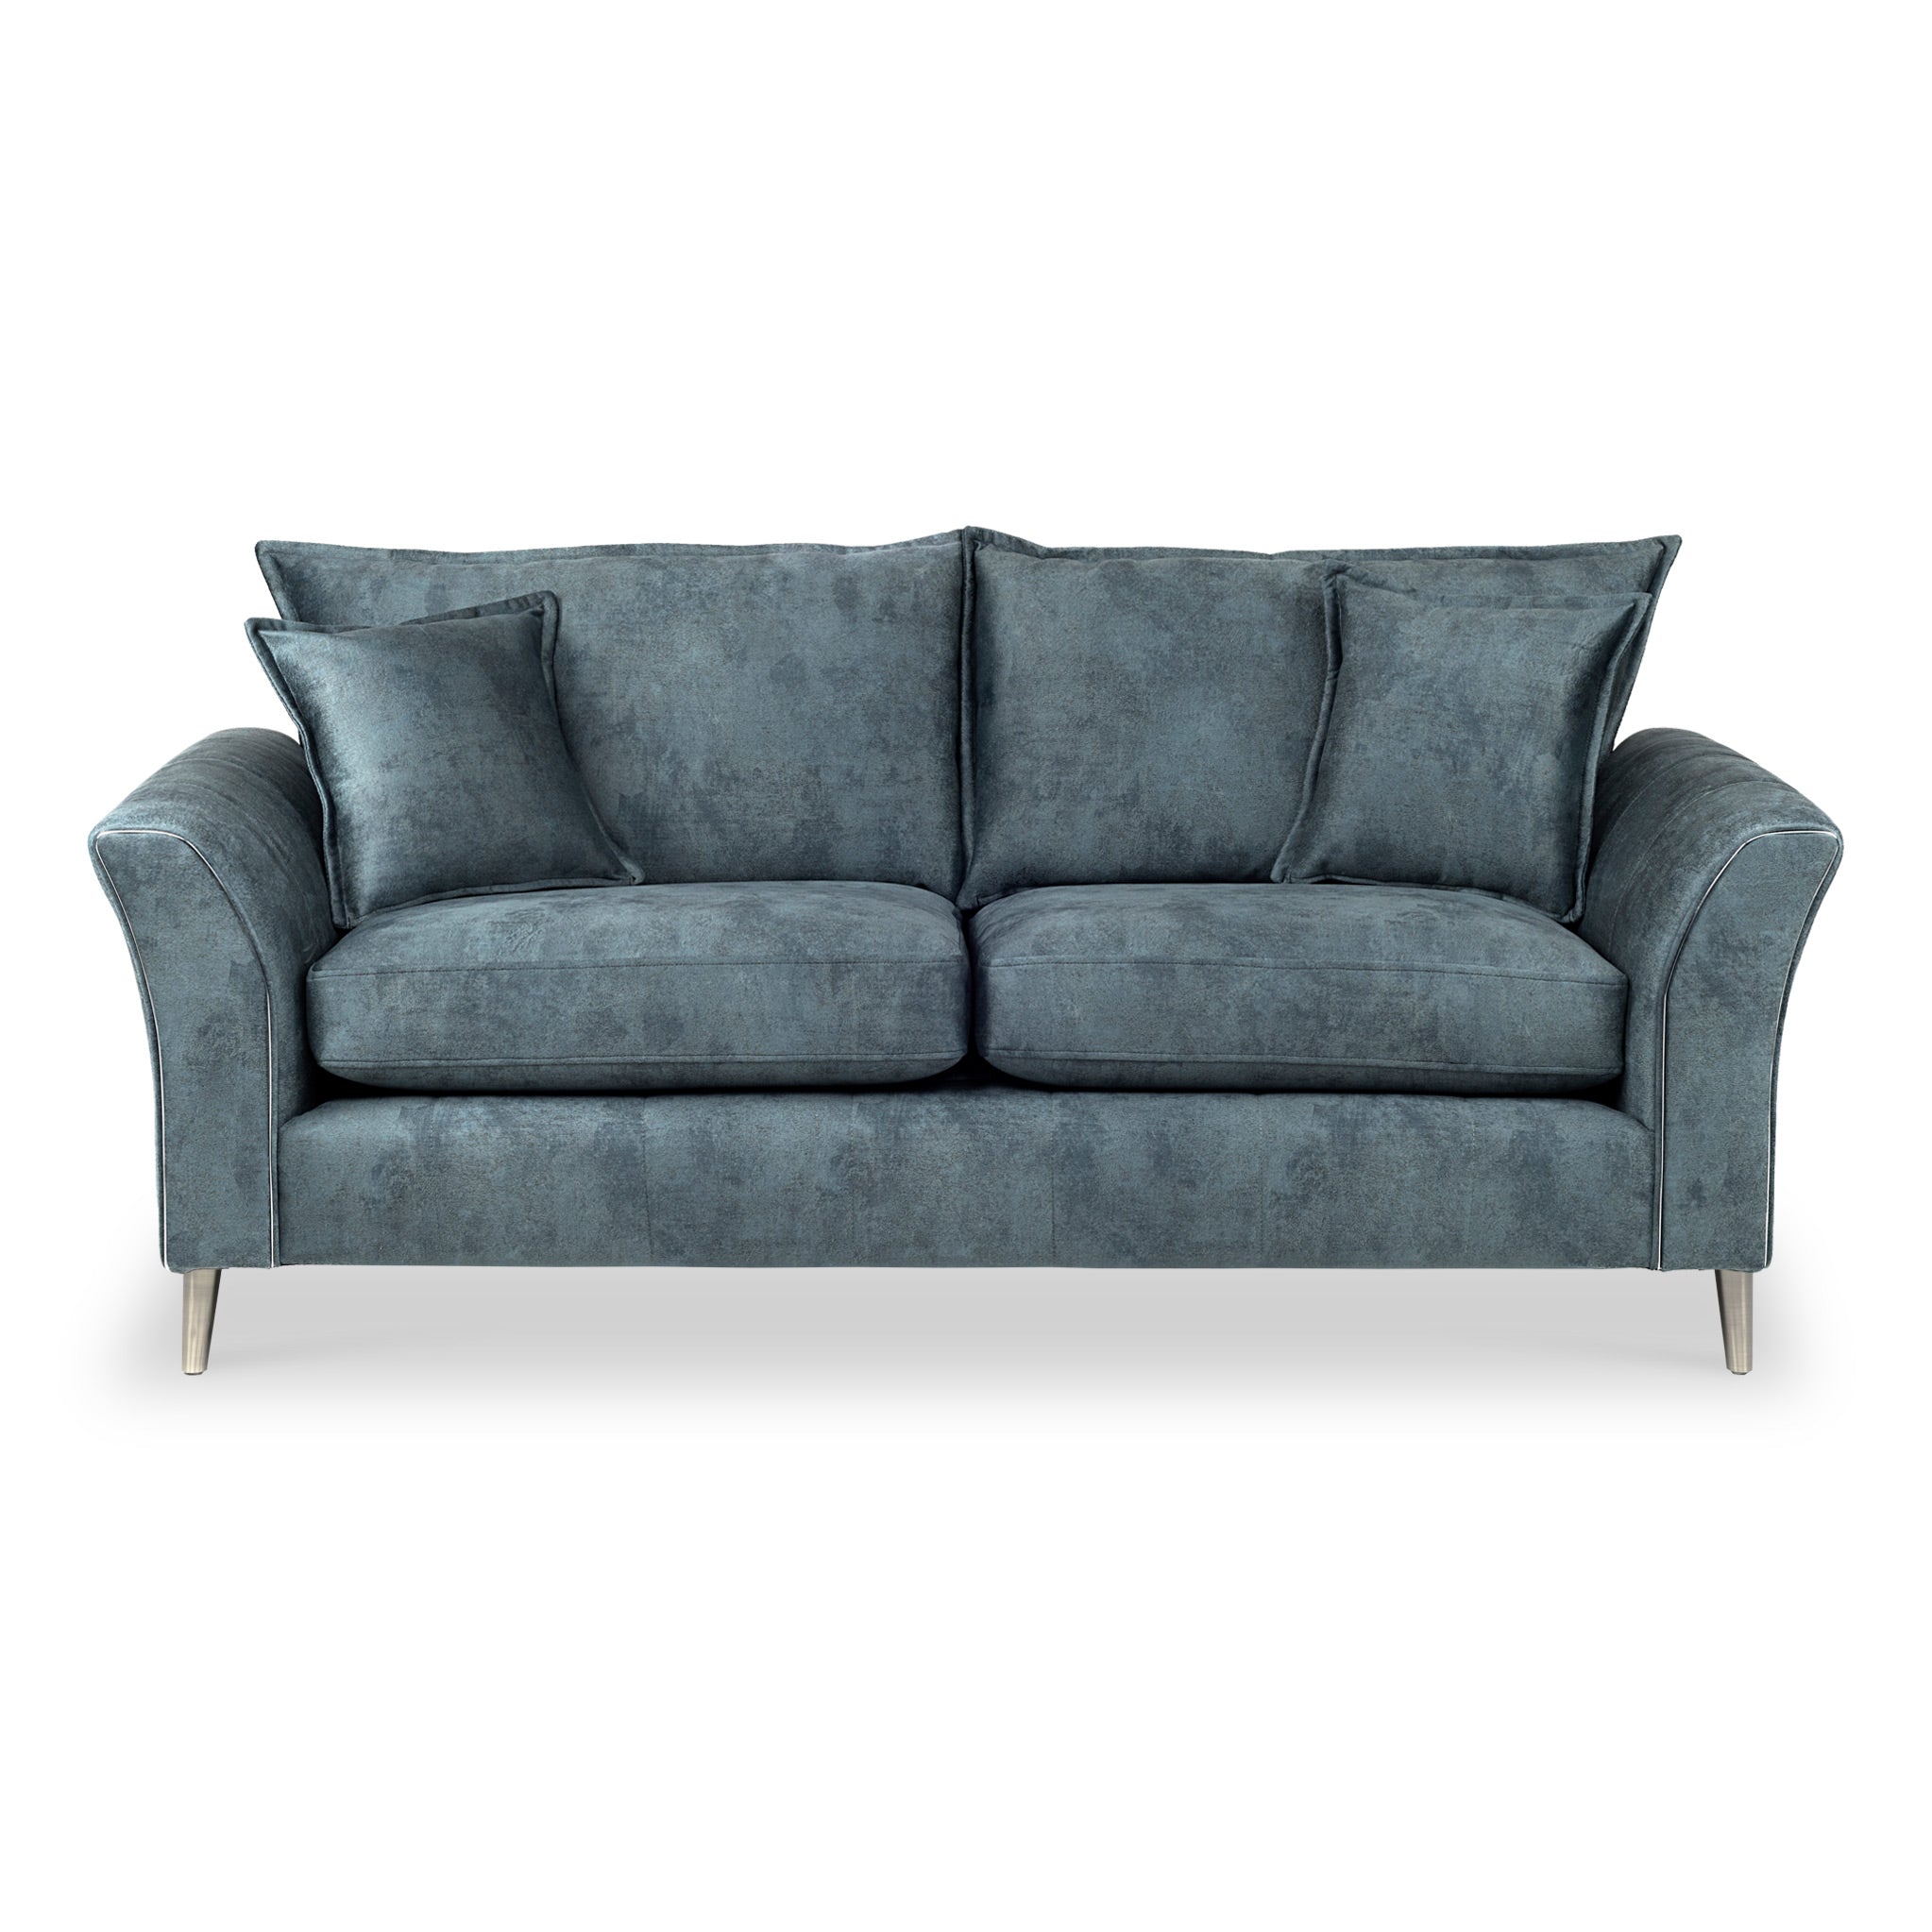 Madrid 3 Seater Sofa Grey Blue Fabric Couch Roseland